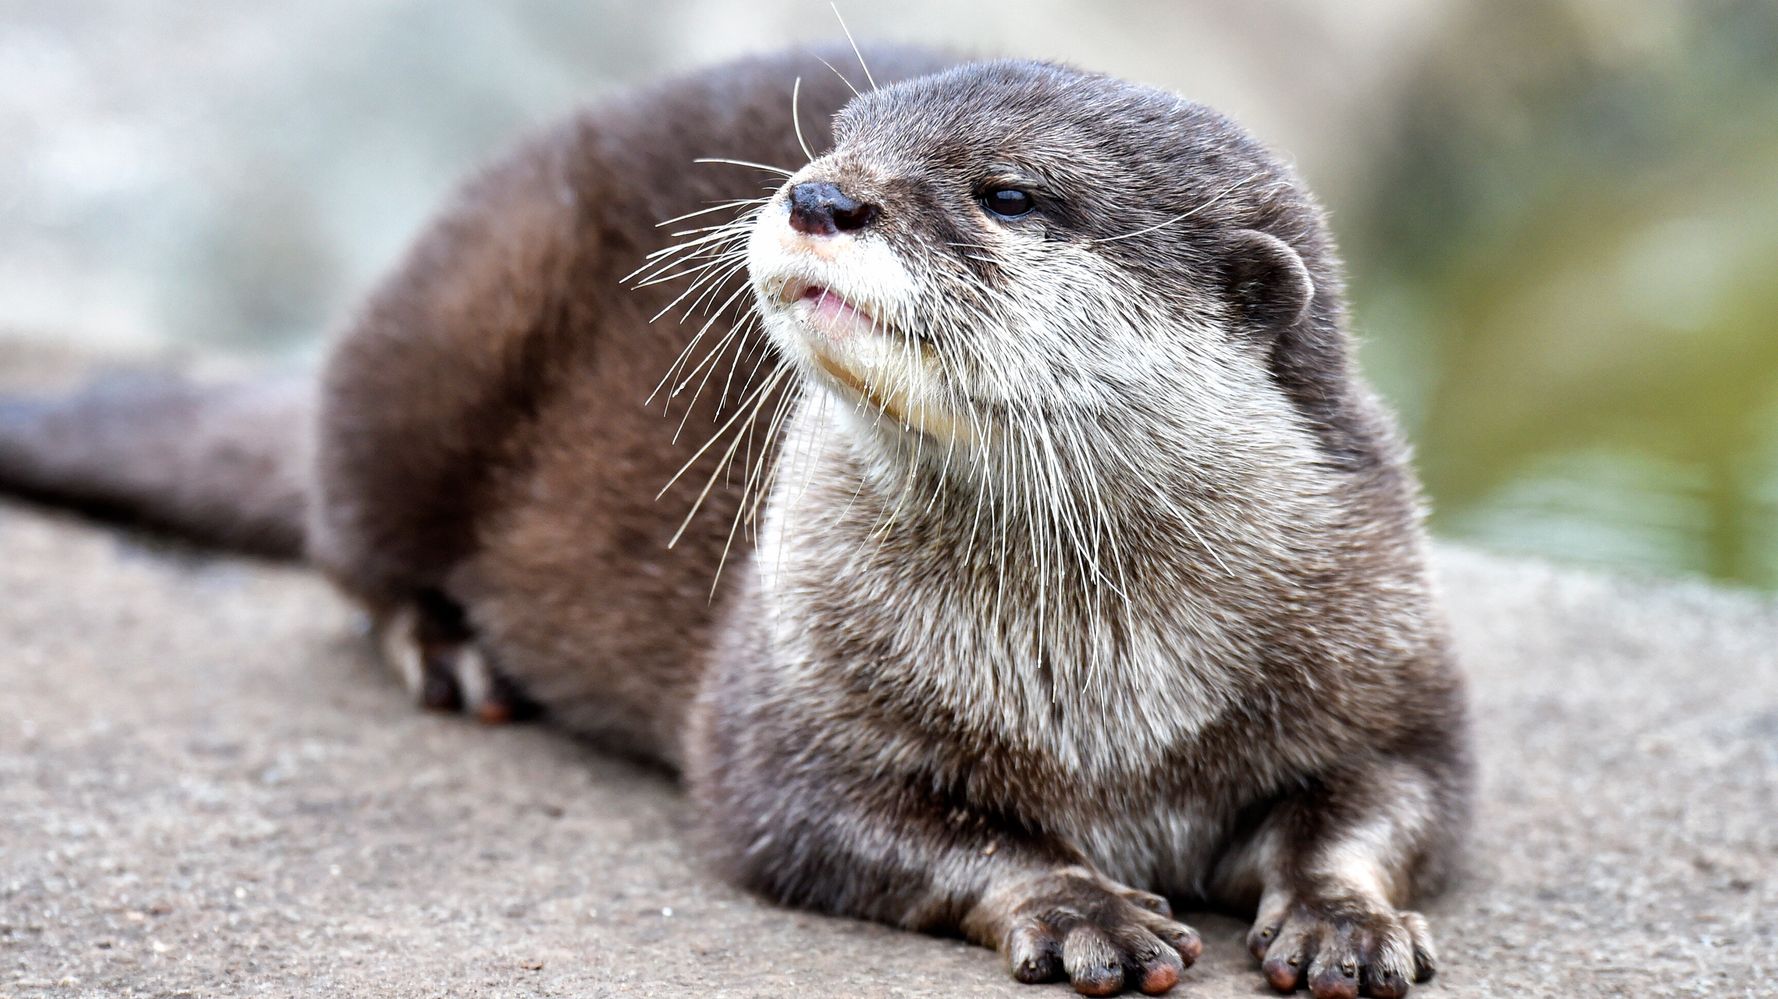 It seems that otters can also get COVID-19